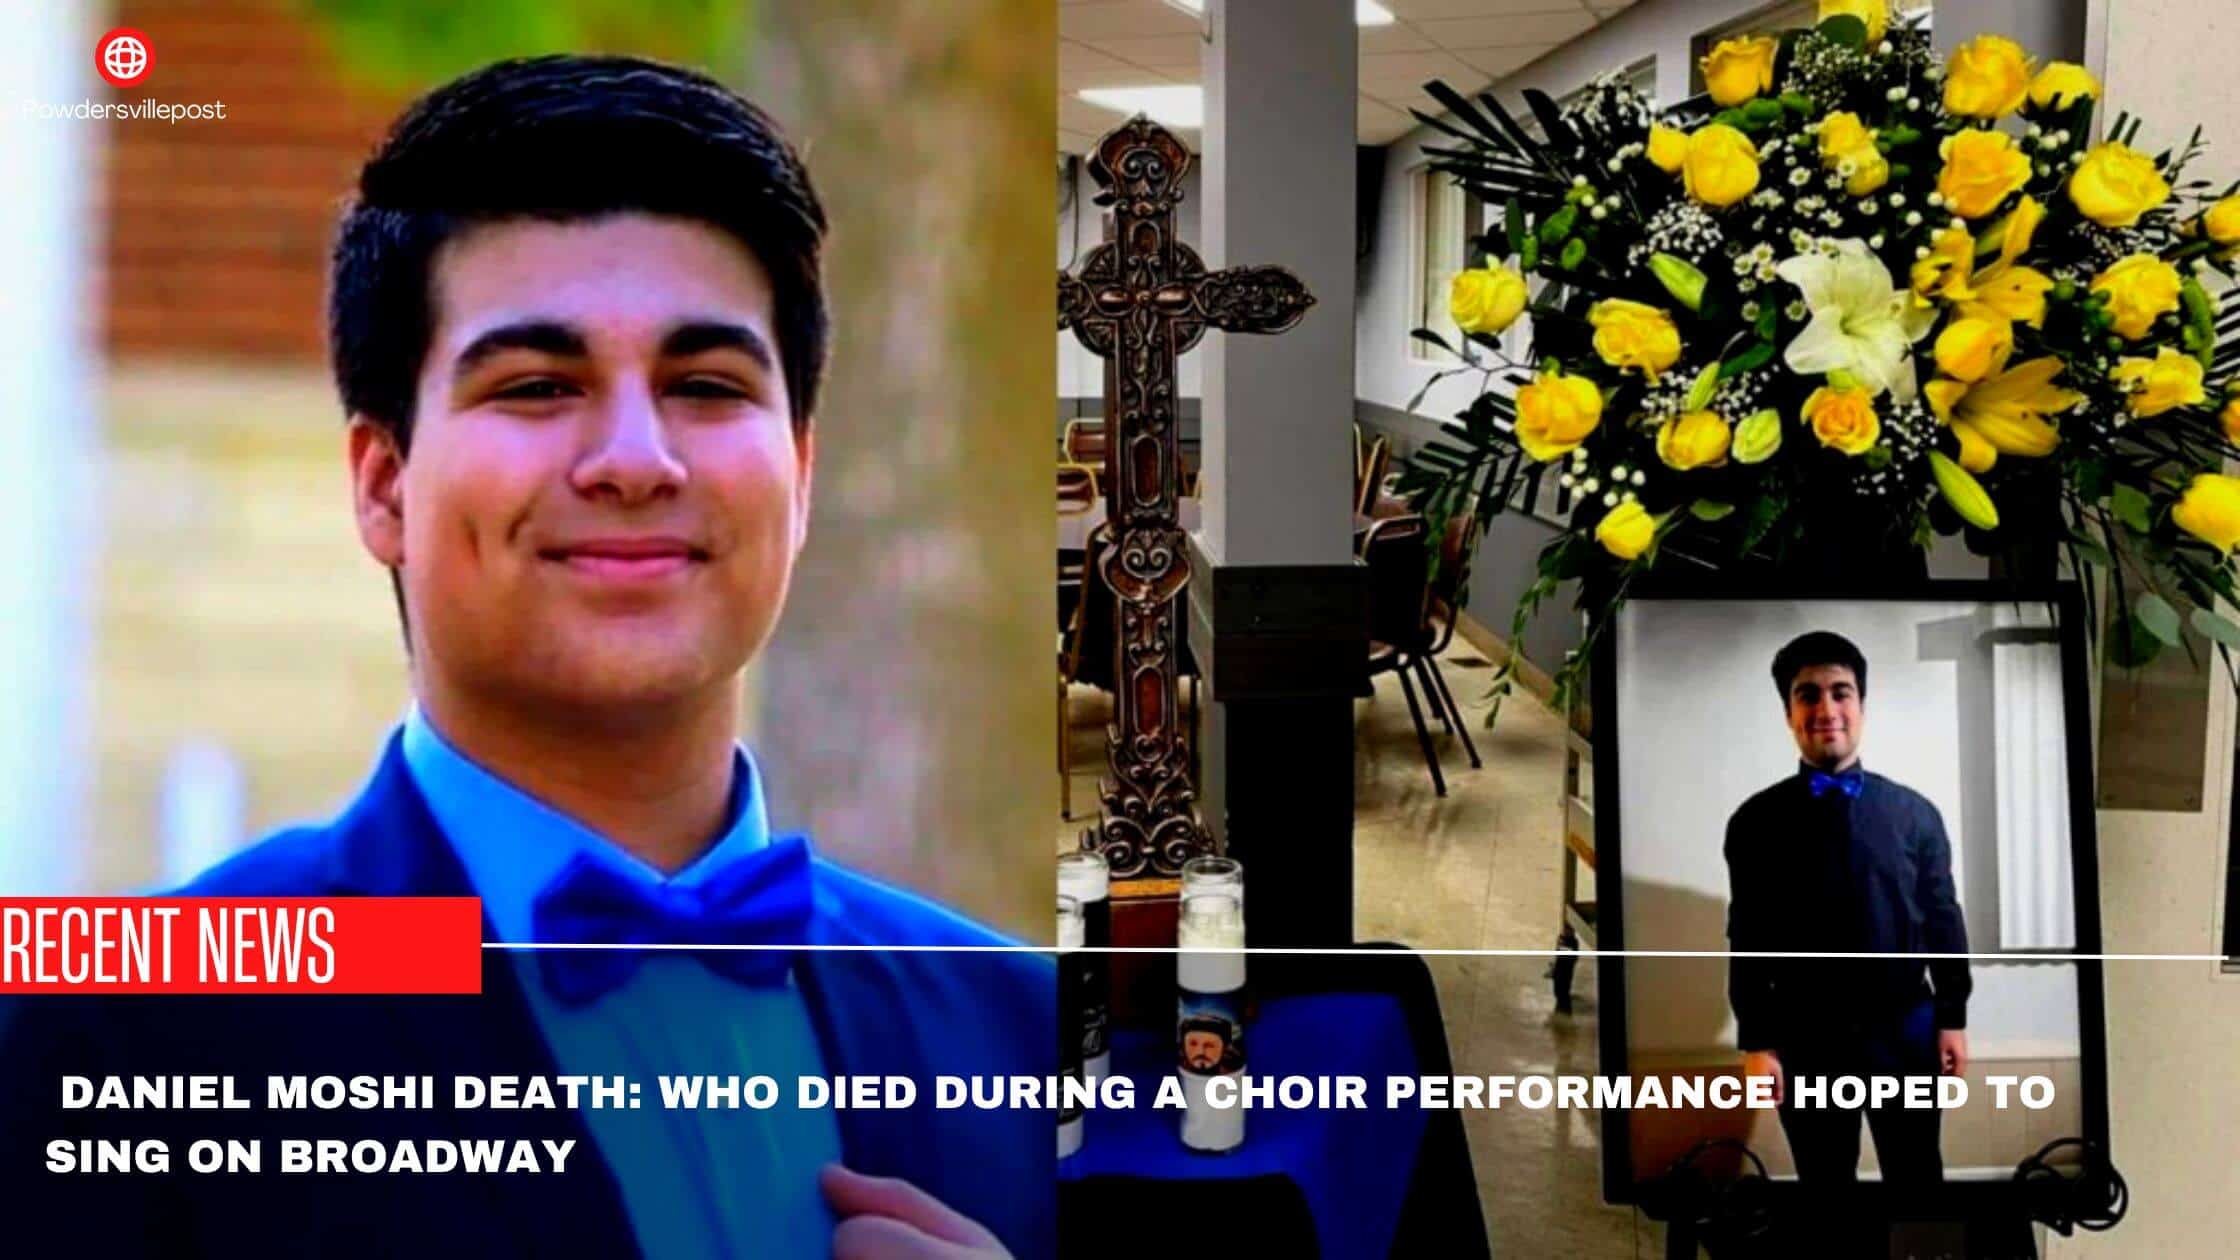  Daniel Moshi Death Who Died During A Choir Performance Hoped To Sing On Broadway